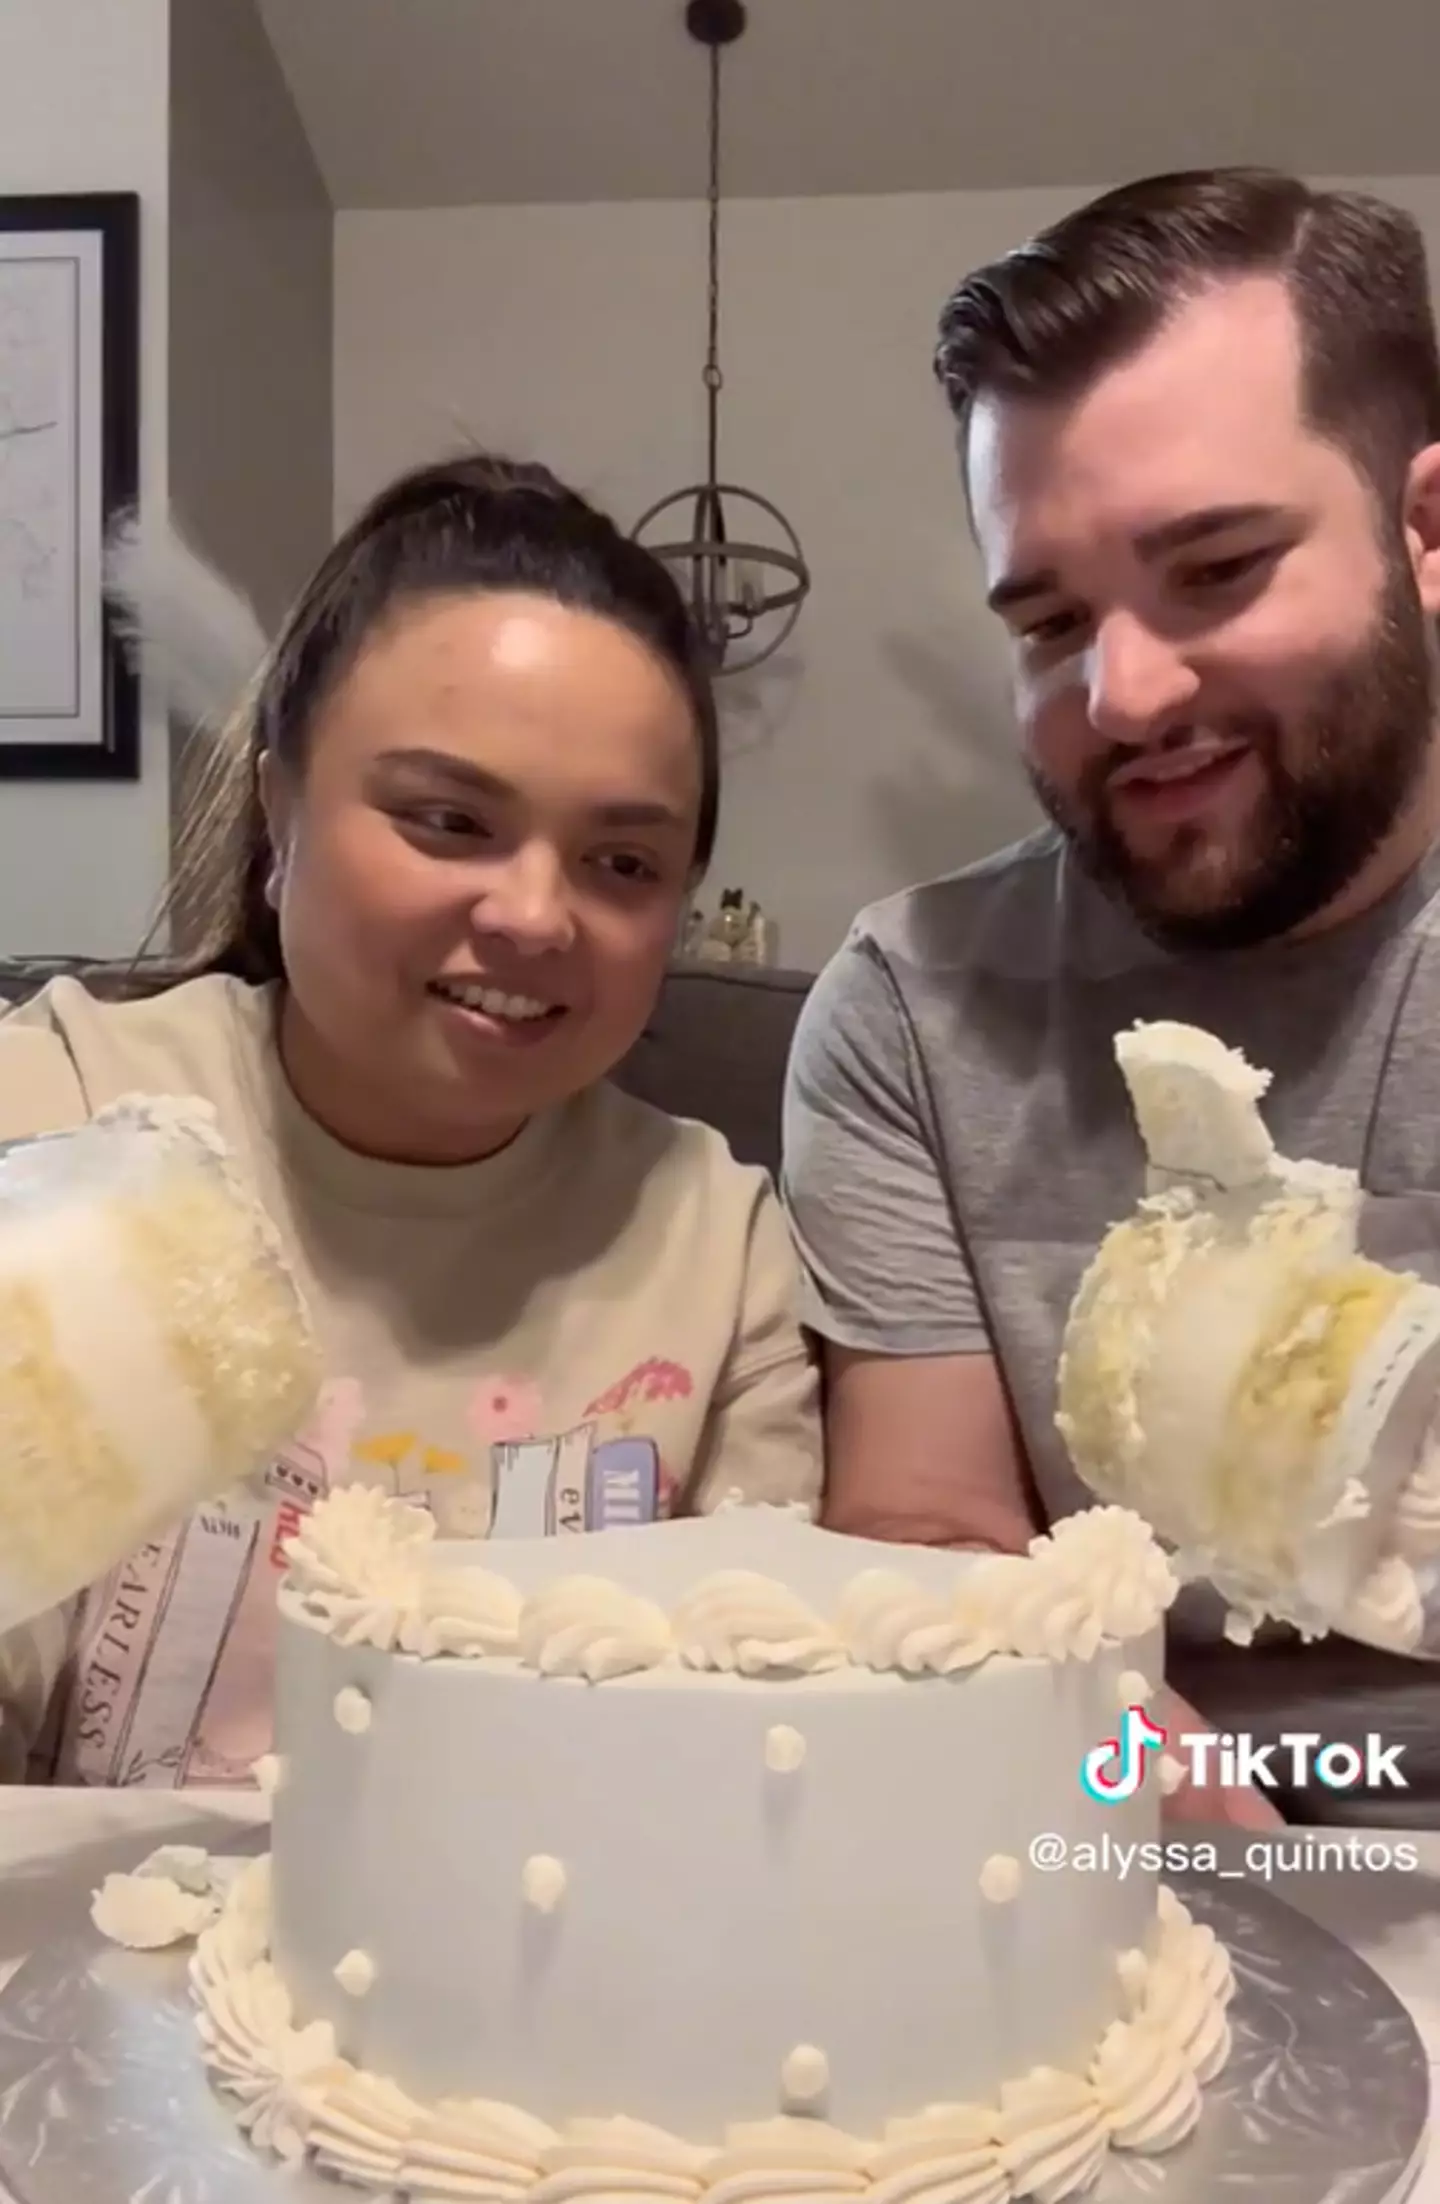 Alyssa and Christian were speechless after a bakery mix up ruined their gender reveal.